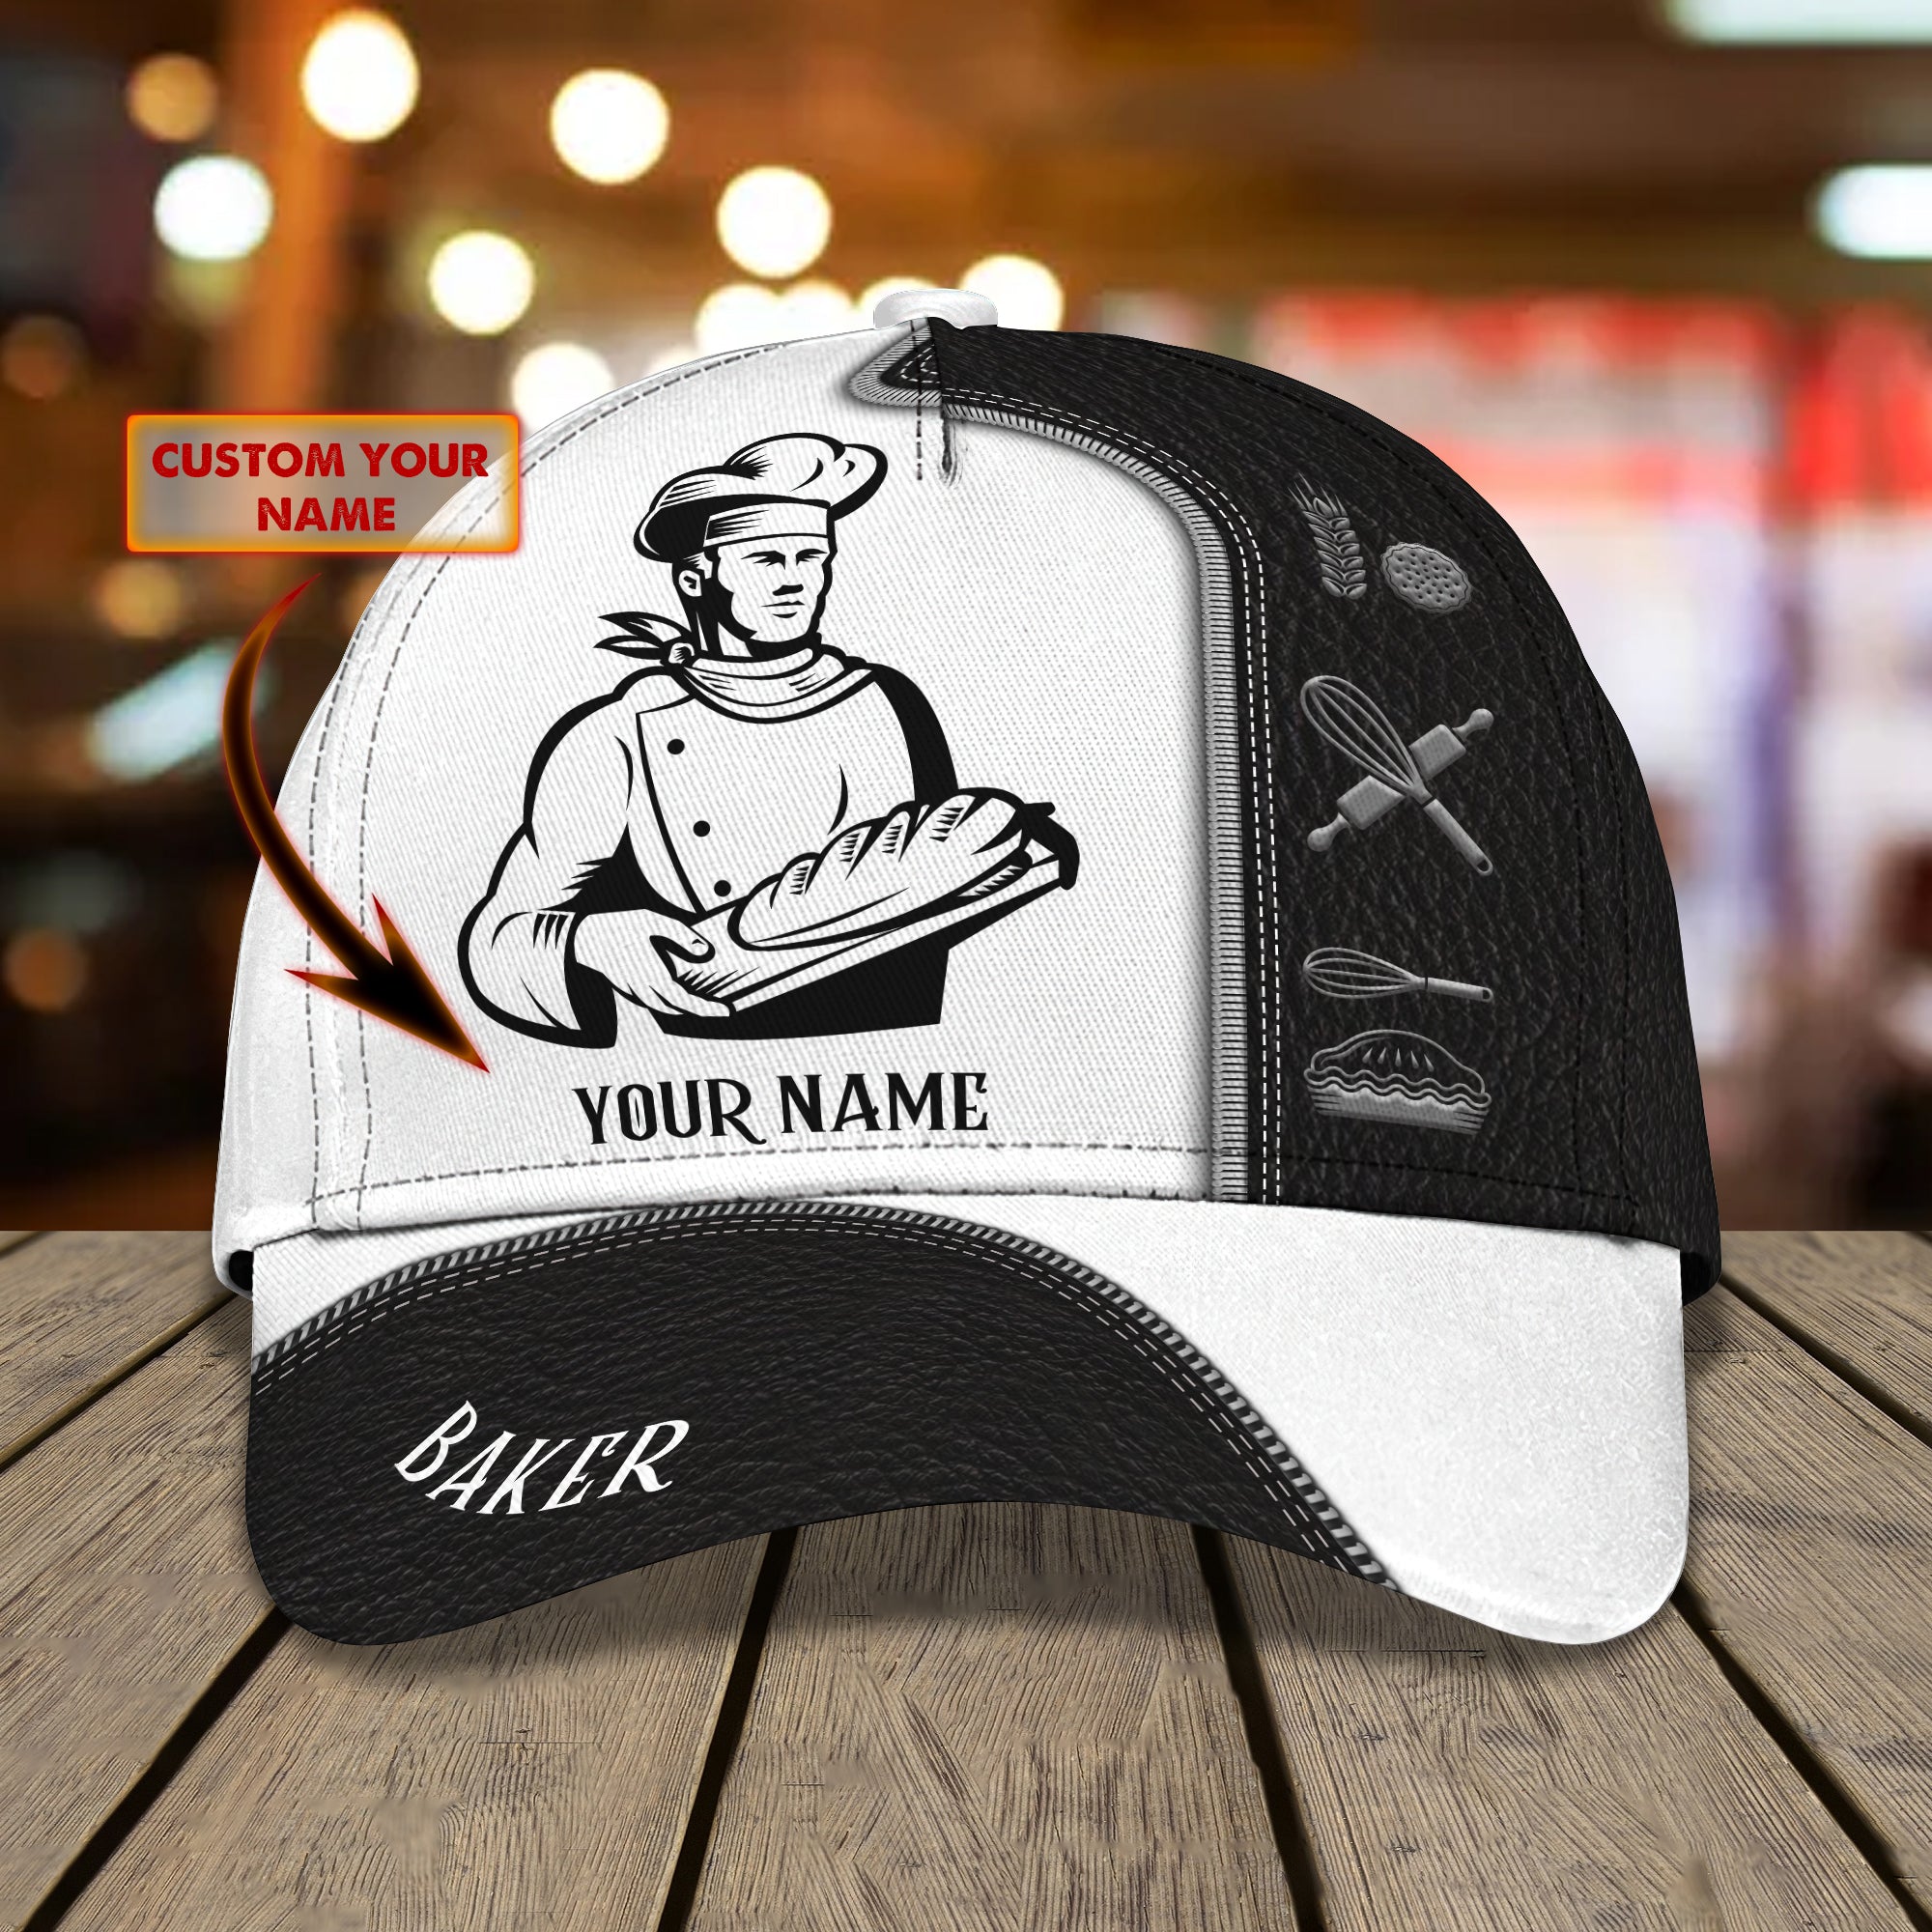 TD97 - Personalized Name Cap - Baker 01